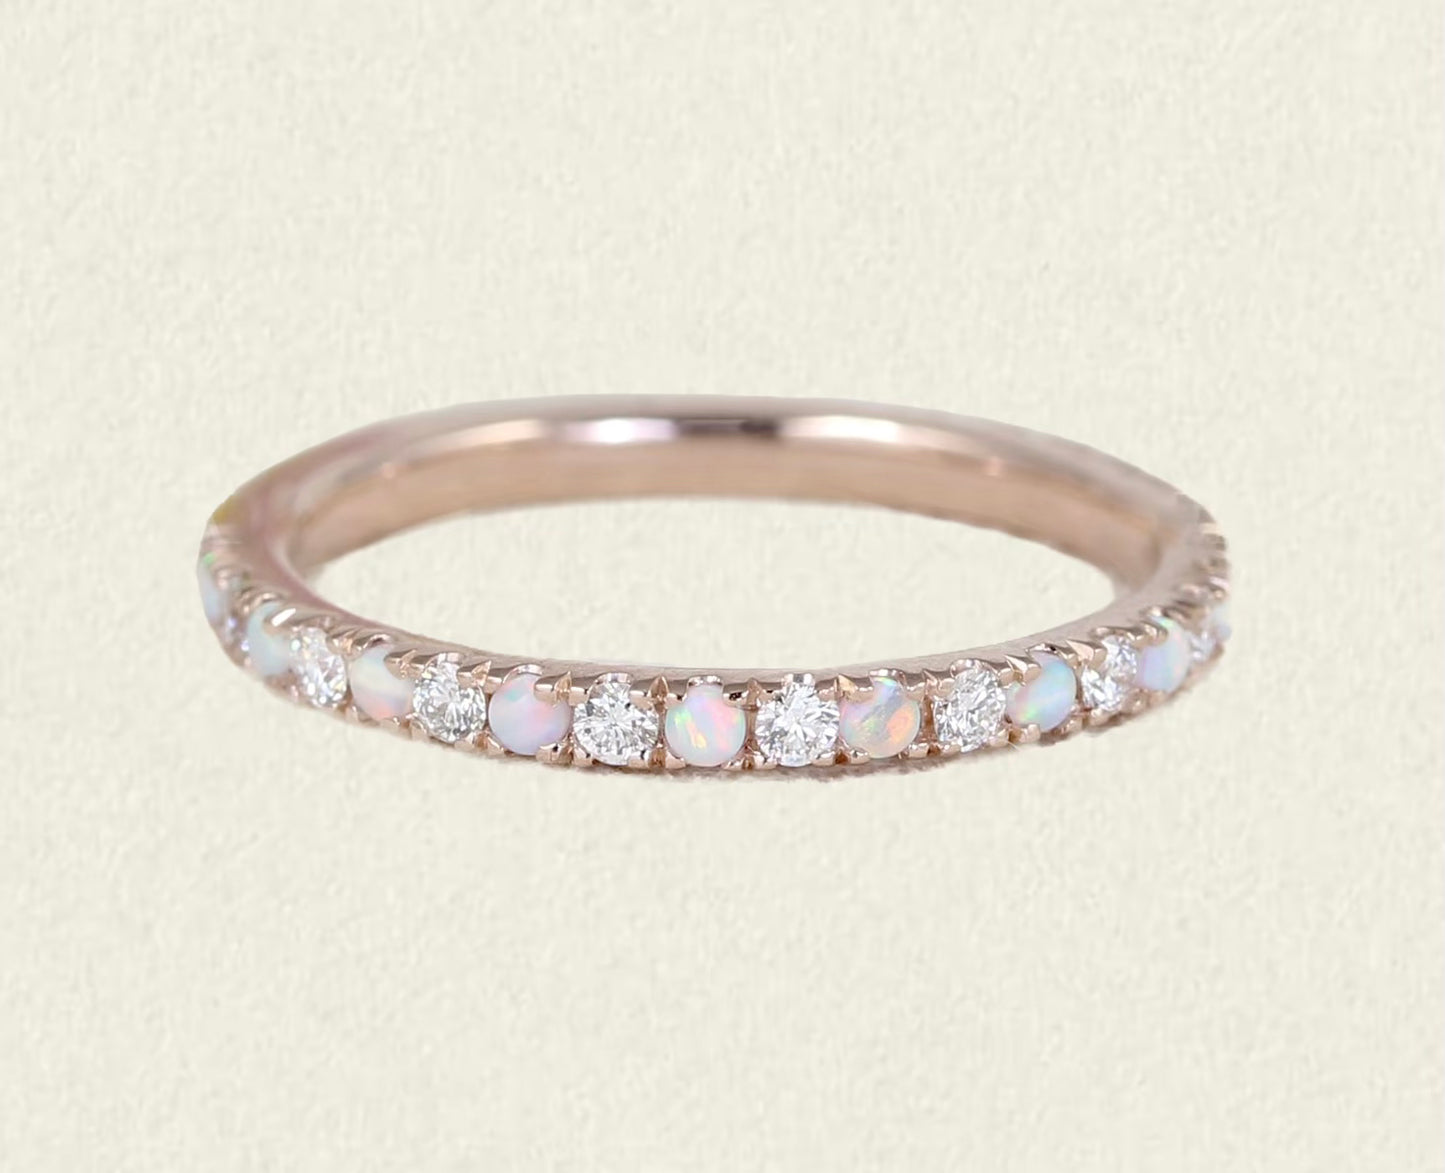 Reserved for Aaron ONLY/ 2mm Platinum Band with Pave Set Alternating Natural Diamonds and Opals